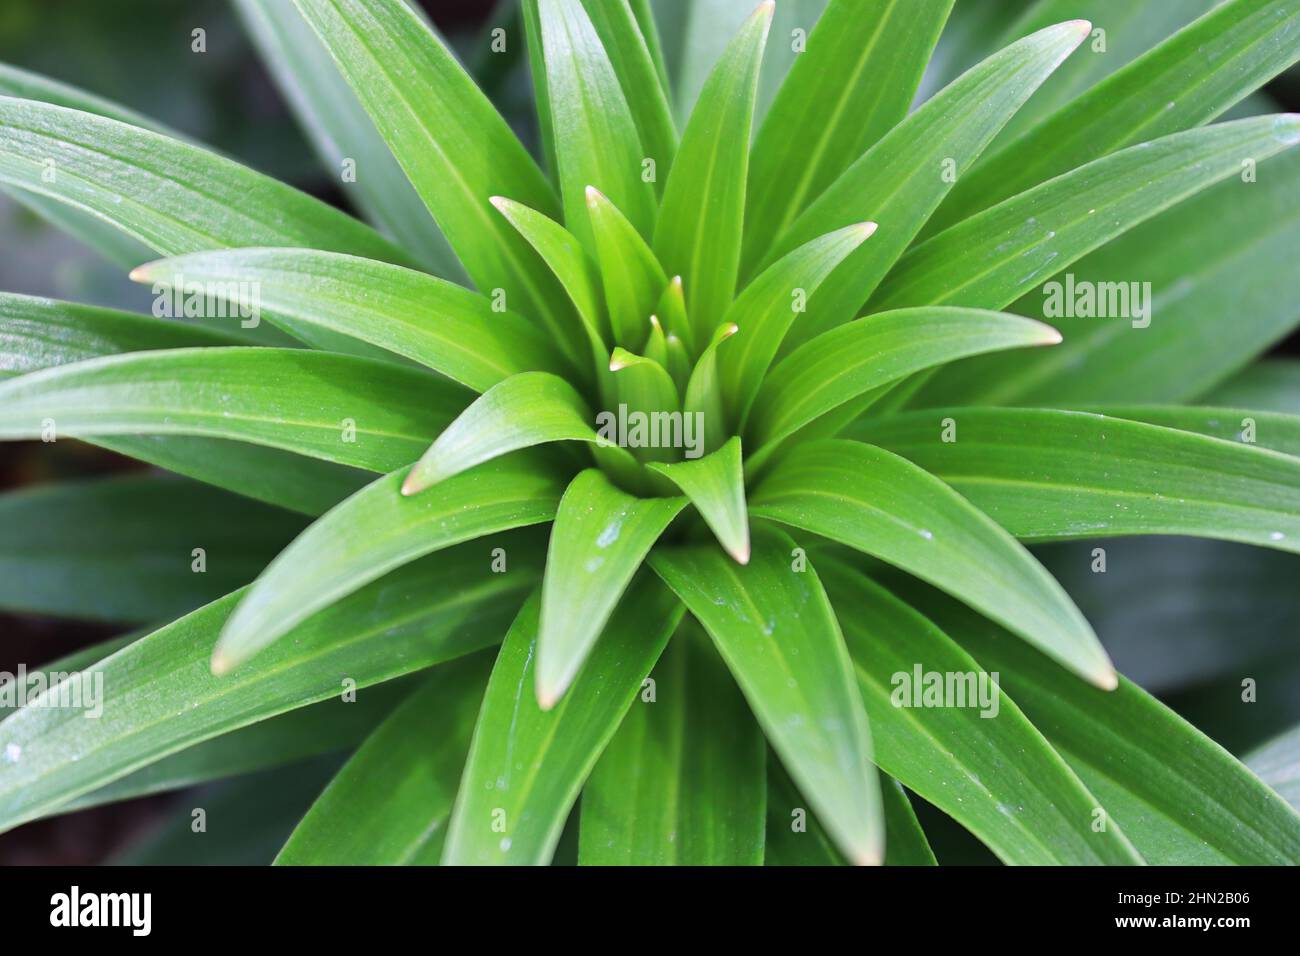 The green spiky foliage on lily plants Stock Photo